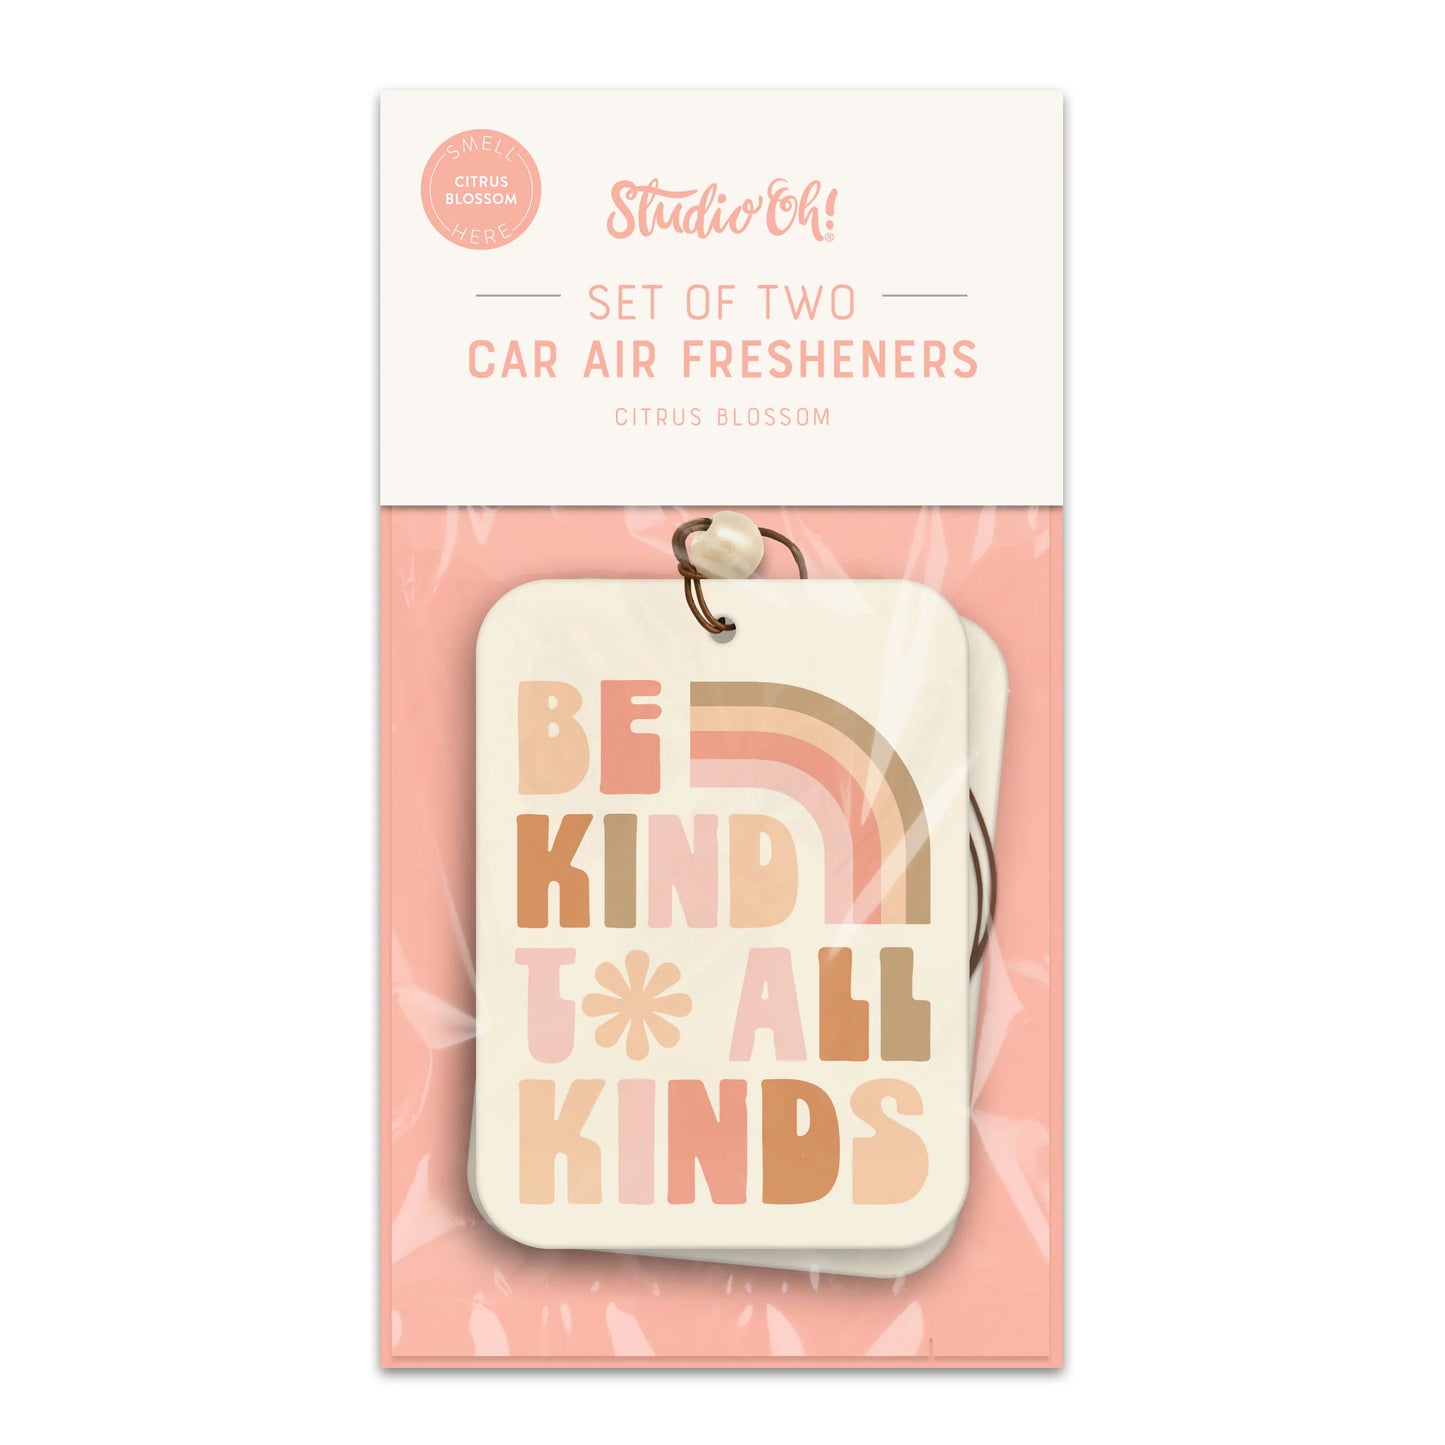 Car Air Fresheners - Be Kind to All Kinds